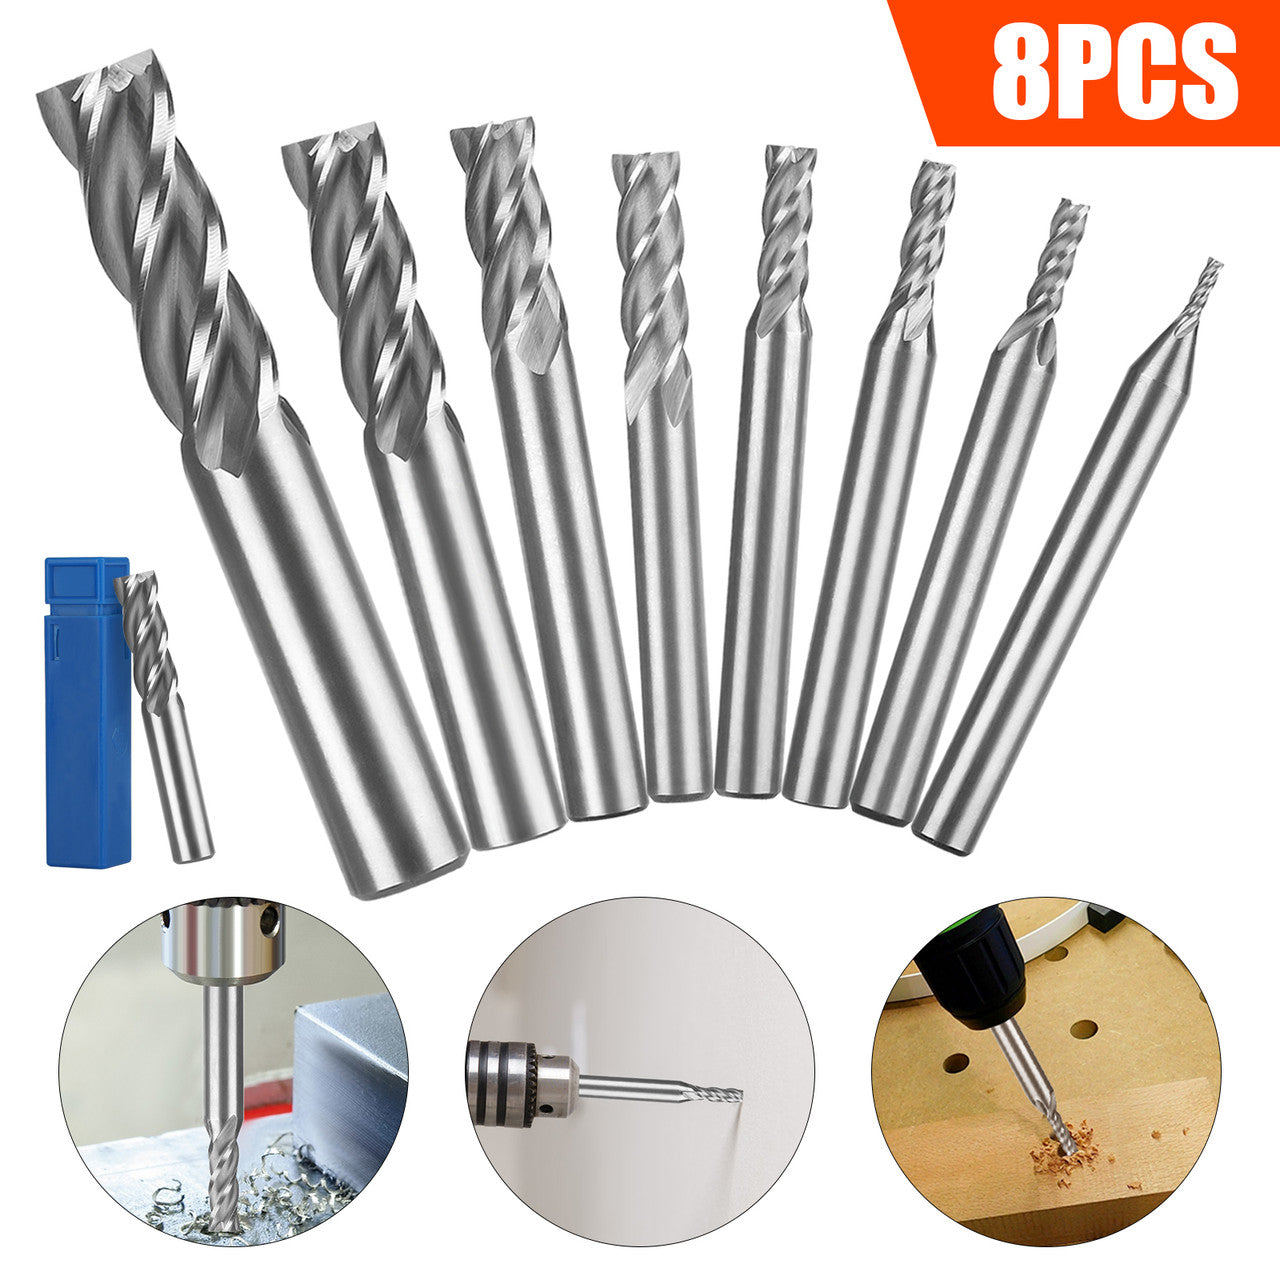 8 PCS Carbide End Mill Cutter, 8 in 1 Cutting Diameter--1/16", 1/8", 5/32", 3/16", 1/4", 5/16", 3/8", 1/2",with Negative Rake Angle and Large-core for Wood, Carbon Steel, Cast Iron, Titanium, Aluminum